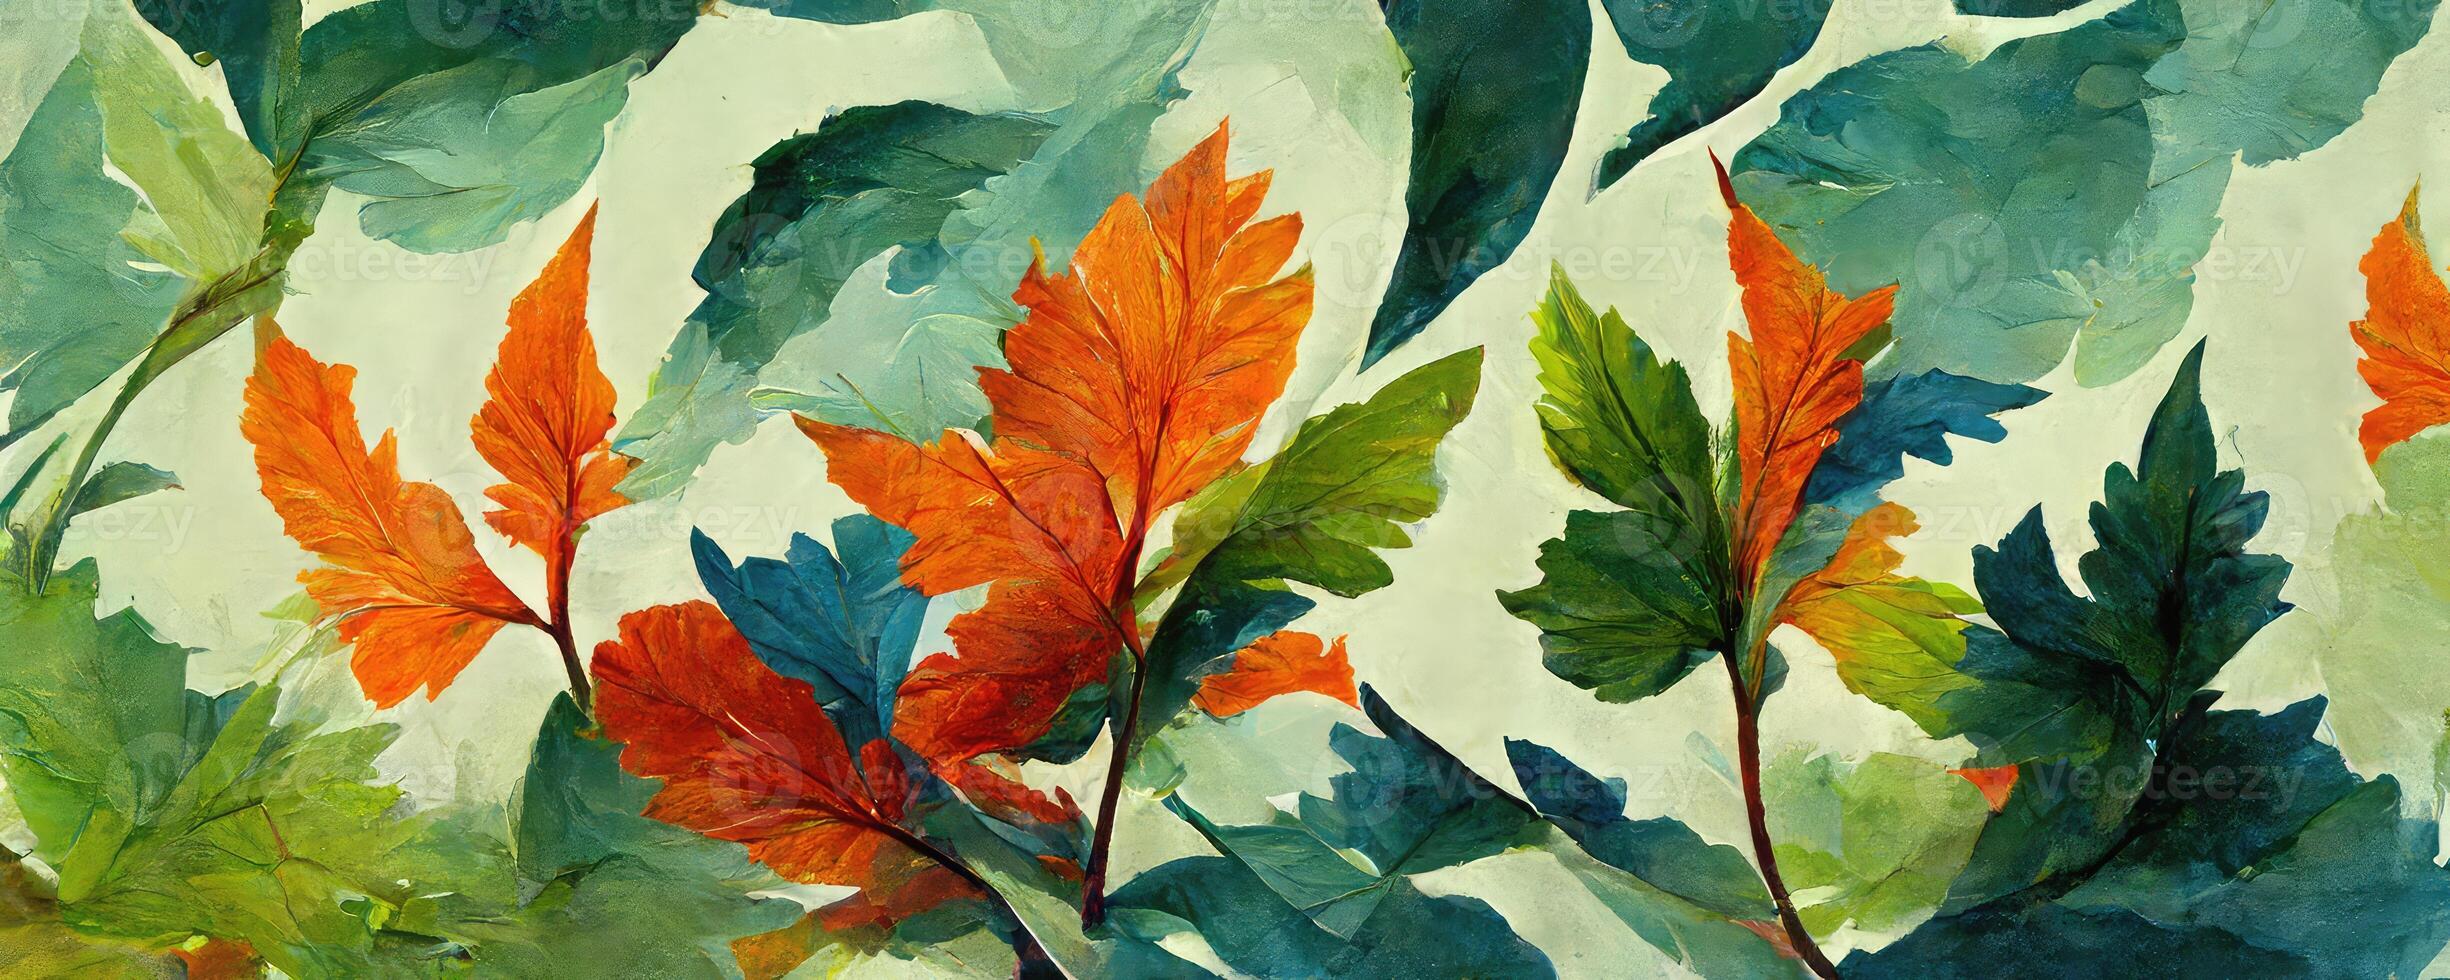 Leaves drawn in watercolor style. photo